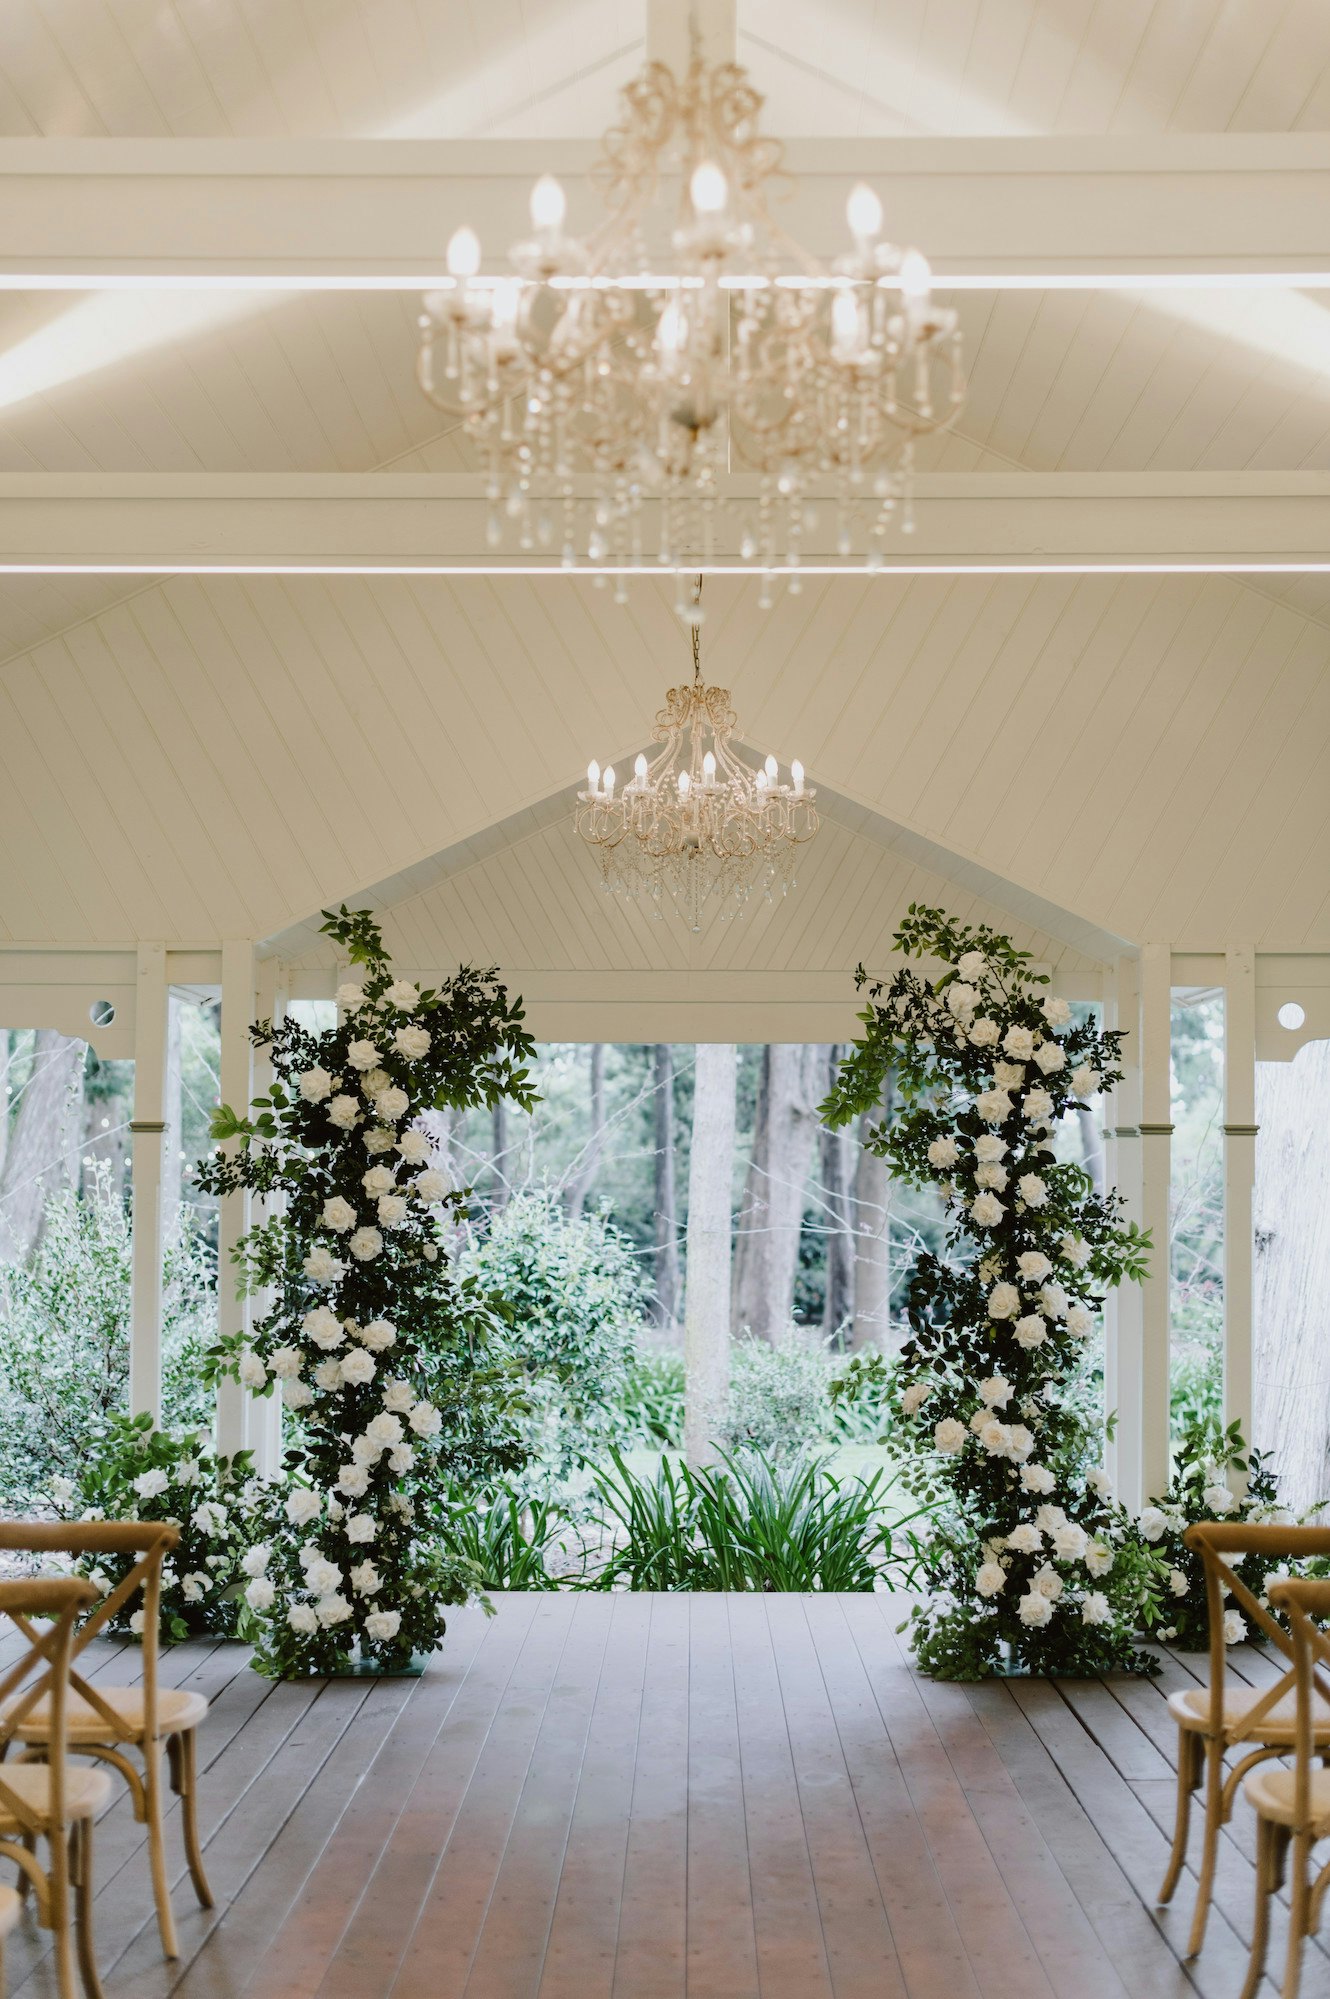 Floral arbour with lots of white roses